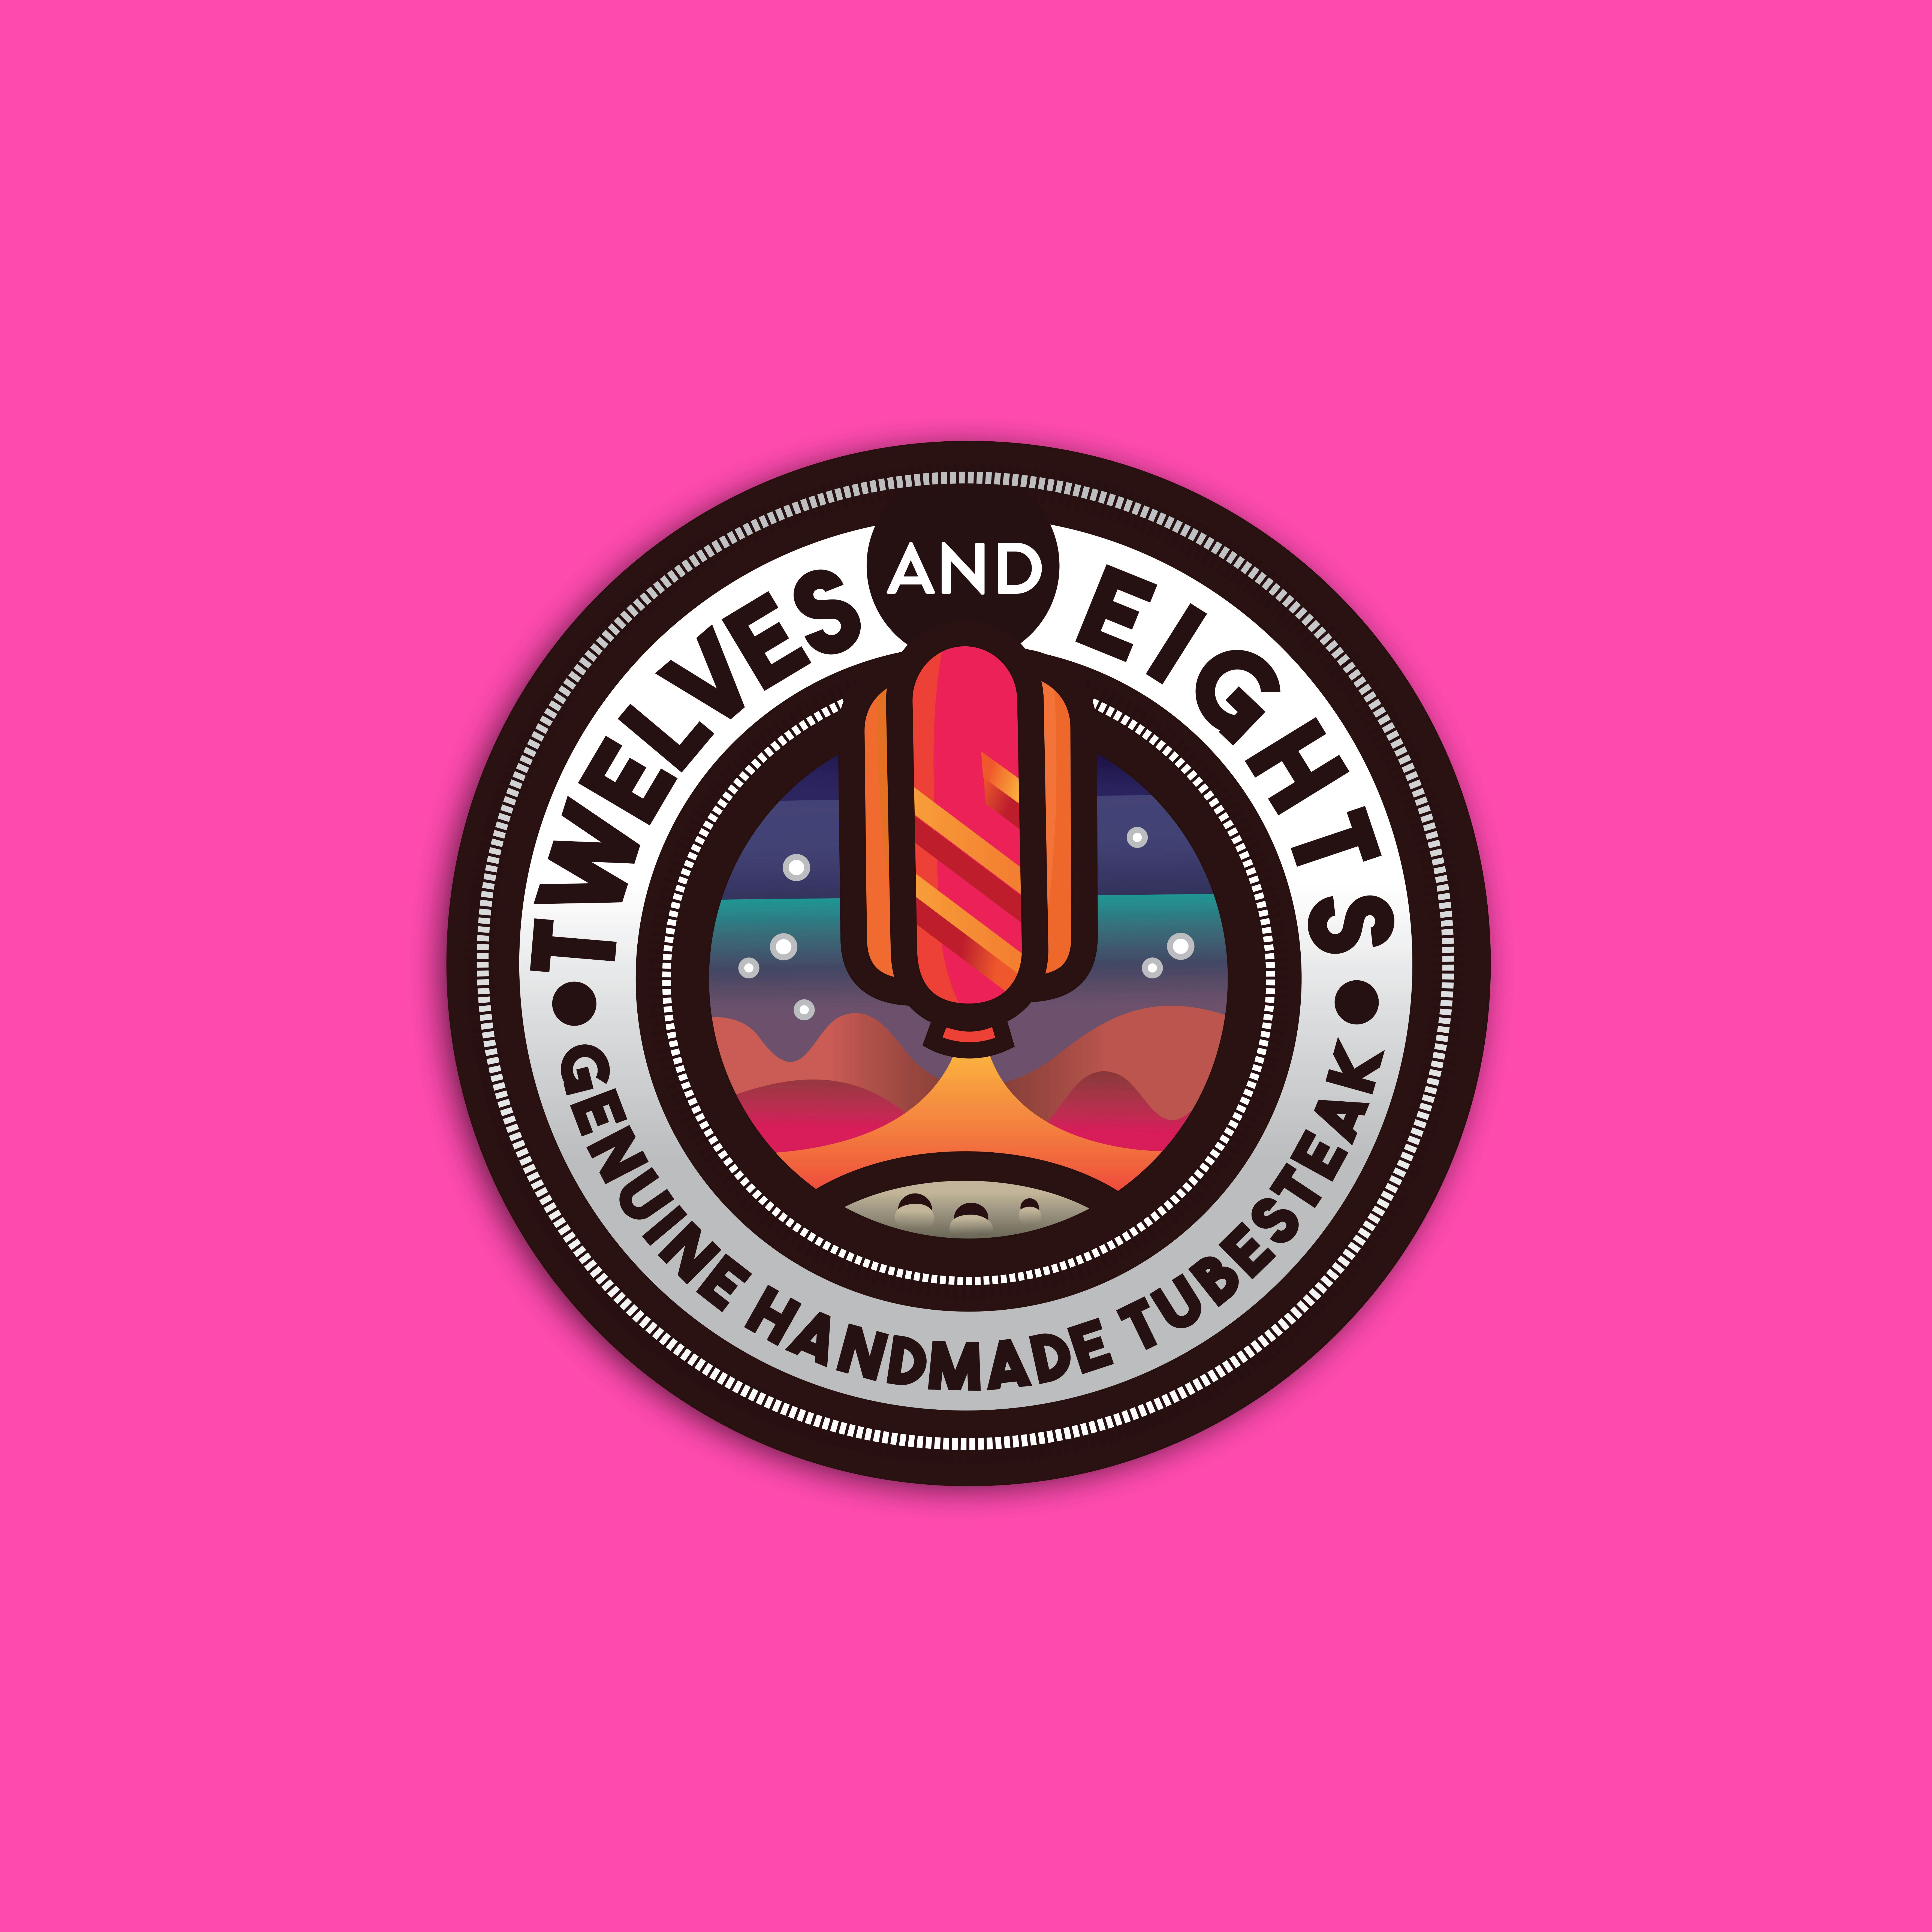 Twelves and Eights logo